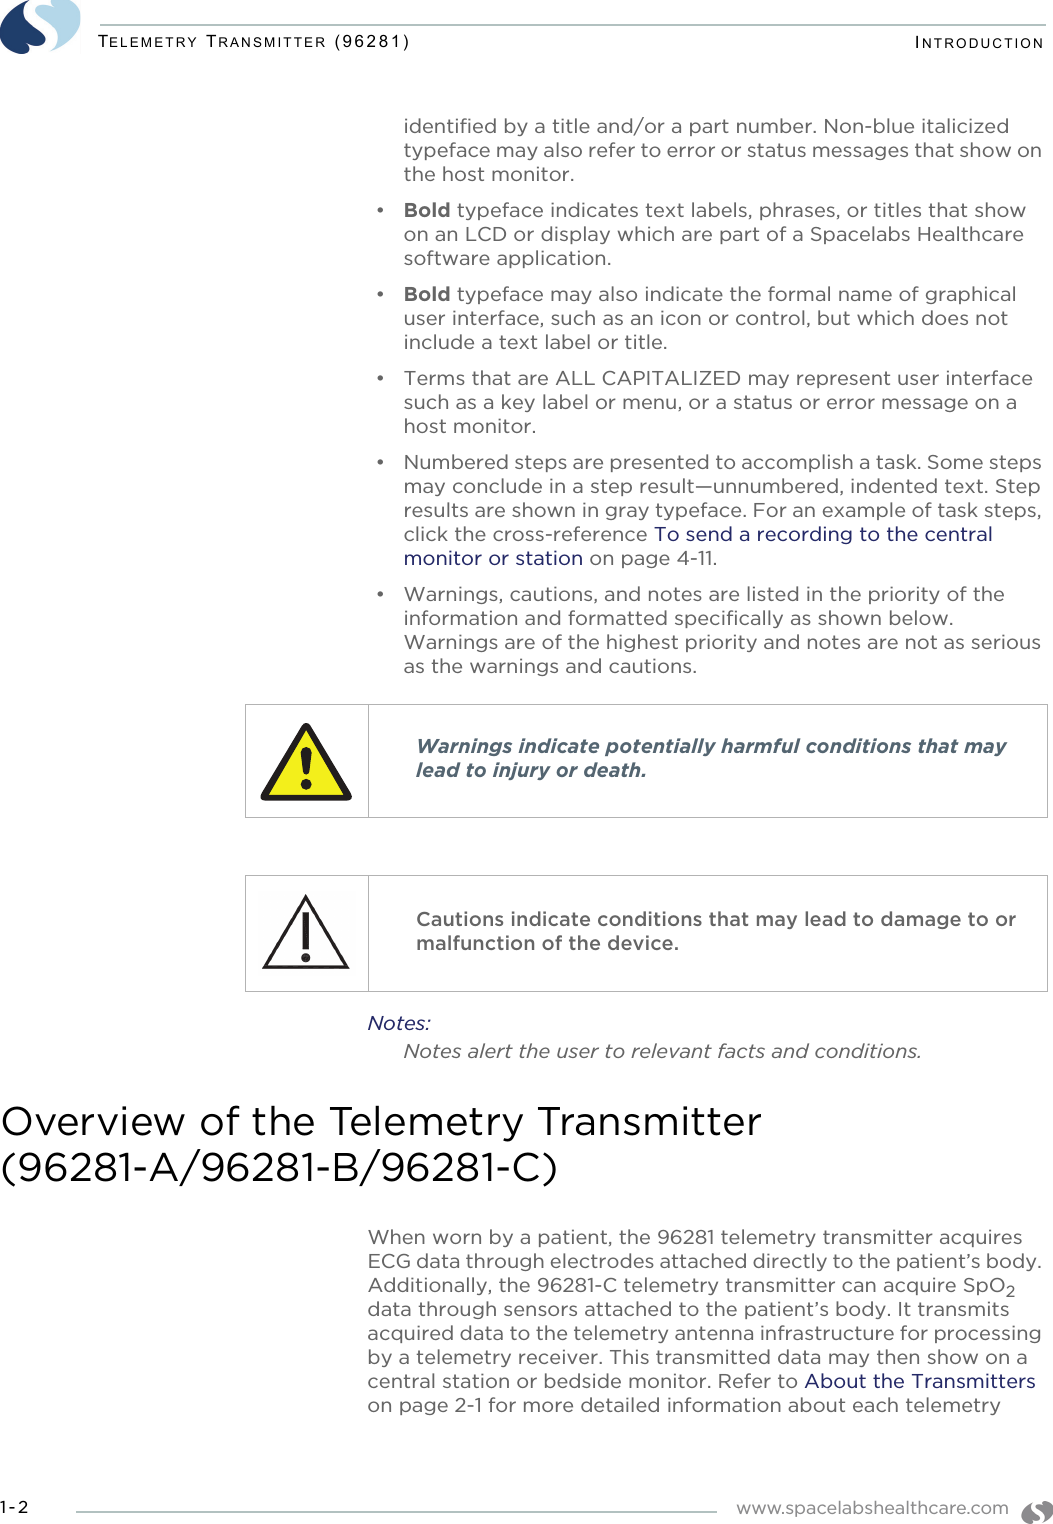 www.spacelabshealthcare.com1-2TELEMETRY TRANSMITTER (96281) INTRODUCTIONidentified by a title and/or a part number. Non-blue italicized typeface may also refer to error or status messages that show on the host monitor.•Bold typeface indicates text labels, phrases, or titles that show on an LCD or display which are part of a Spacelabs Healthcare software application. •Bold typeface may also indicate the formal name of graphical user interface, such as an icon or control, but which does not include a text label or title.• Terms that are ALL CAPITALIZED may represent user interface such as a key label or menu, or a status or error message on a host monitor.• Numbered steps are presented to accomplish a task. Some steps may conclude in a step result—unnumbered, indented text. Step results are shown in gray typeface. For an example of task steps, click the cross-reference To send a recording to the central monitor or station on page 4-11.• Warnings, cautions, and notes are listed in the priority of the information and formatted specifically as shown below. Warnings are of the highest priority and notes are not as serious as the warnings and cautions. Notes:Notes alert the user to relevant facts and conditions.Overview of the Telemetry Transmitter (96281-A/96281-B/96281-C)When worn by a patient, the 96281 telemetry transmitter acquires ECG data through electrodes attached directly to the patient’s body. Additionally, the 96281-C telemetry transmitter can acquire SpO2 data through sensors attached to the patient’s body. It transmits acquired data to the telemetry antenna infrastructure for processing by a telemetry receiver. This transmitted data may then show on a central station or bedside monitor. Refer to About the Transmitters on page 2-1 for more detailed information about each telemetry Warnings indicate potentially harmful conditions that may lead to injury or death.Cautions indicate conditions that may lead to damage to or malfunction of the device.